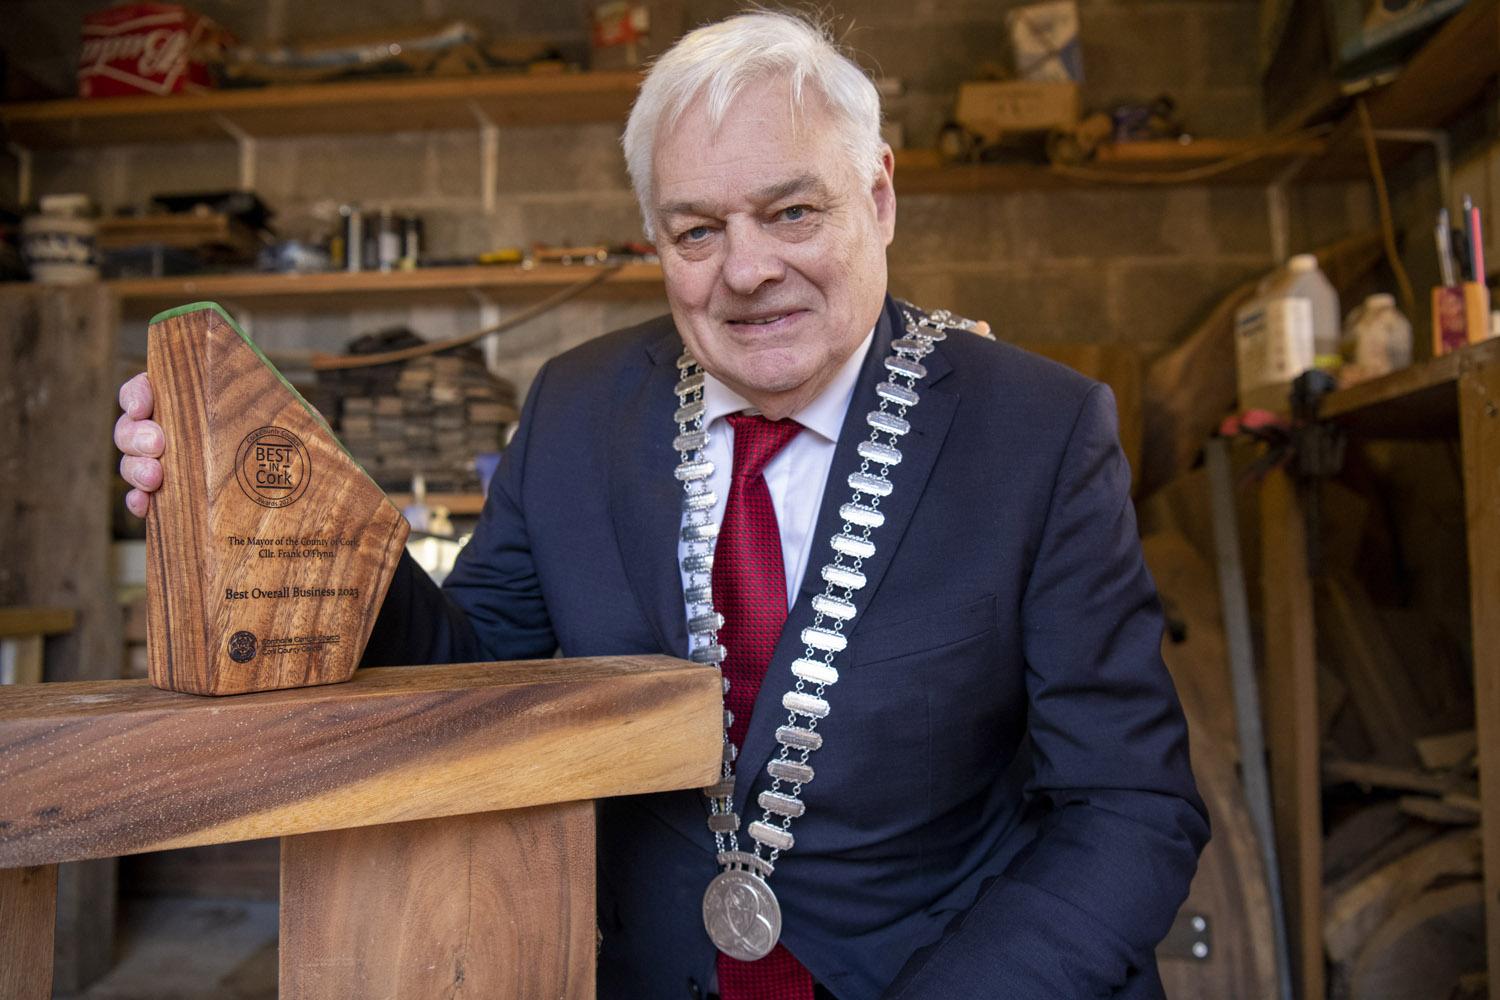 Mayor of the County of Cork, Cllr. Frank O'Flynn with the 'Best in Cork' Awards trophy.